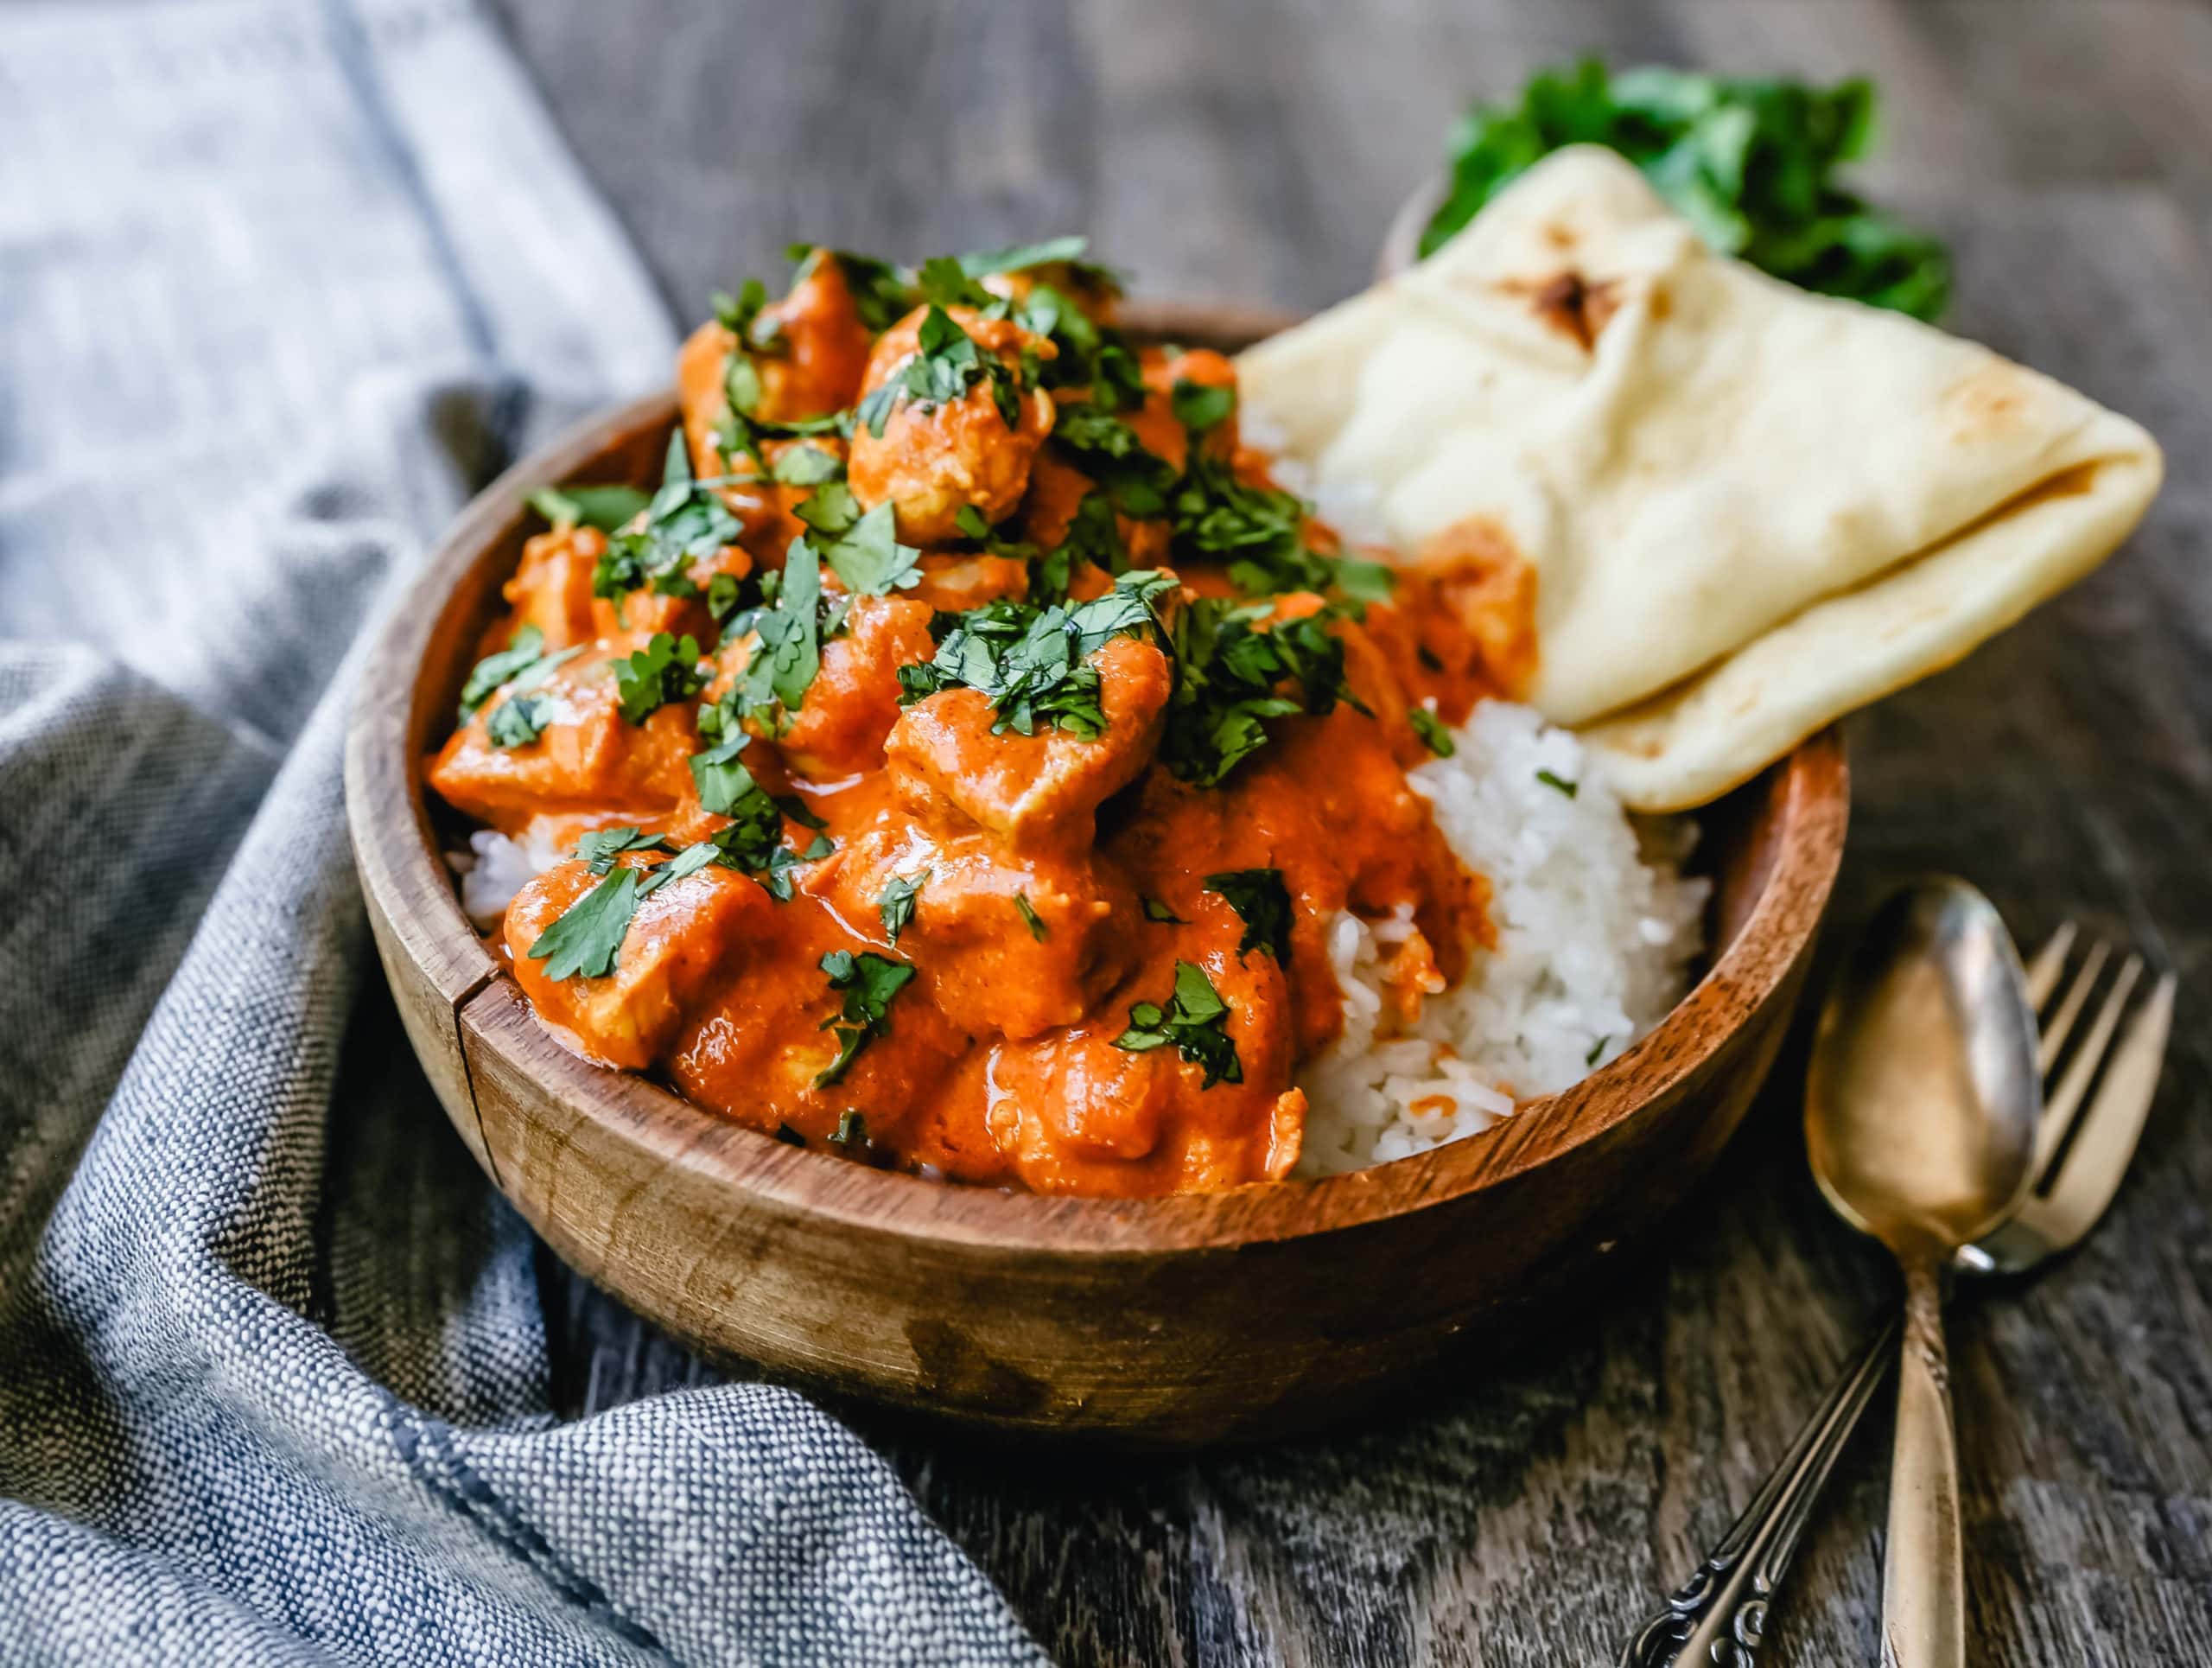 Indian Butter Chicken A popular Indian dish made with tender chicken simmered in a rich, Indian spiced tomato cream sauce I love introducing my kids to unique flavor combinations and Indian food is no exception. Butter chicken is one of their most requested dishes!